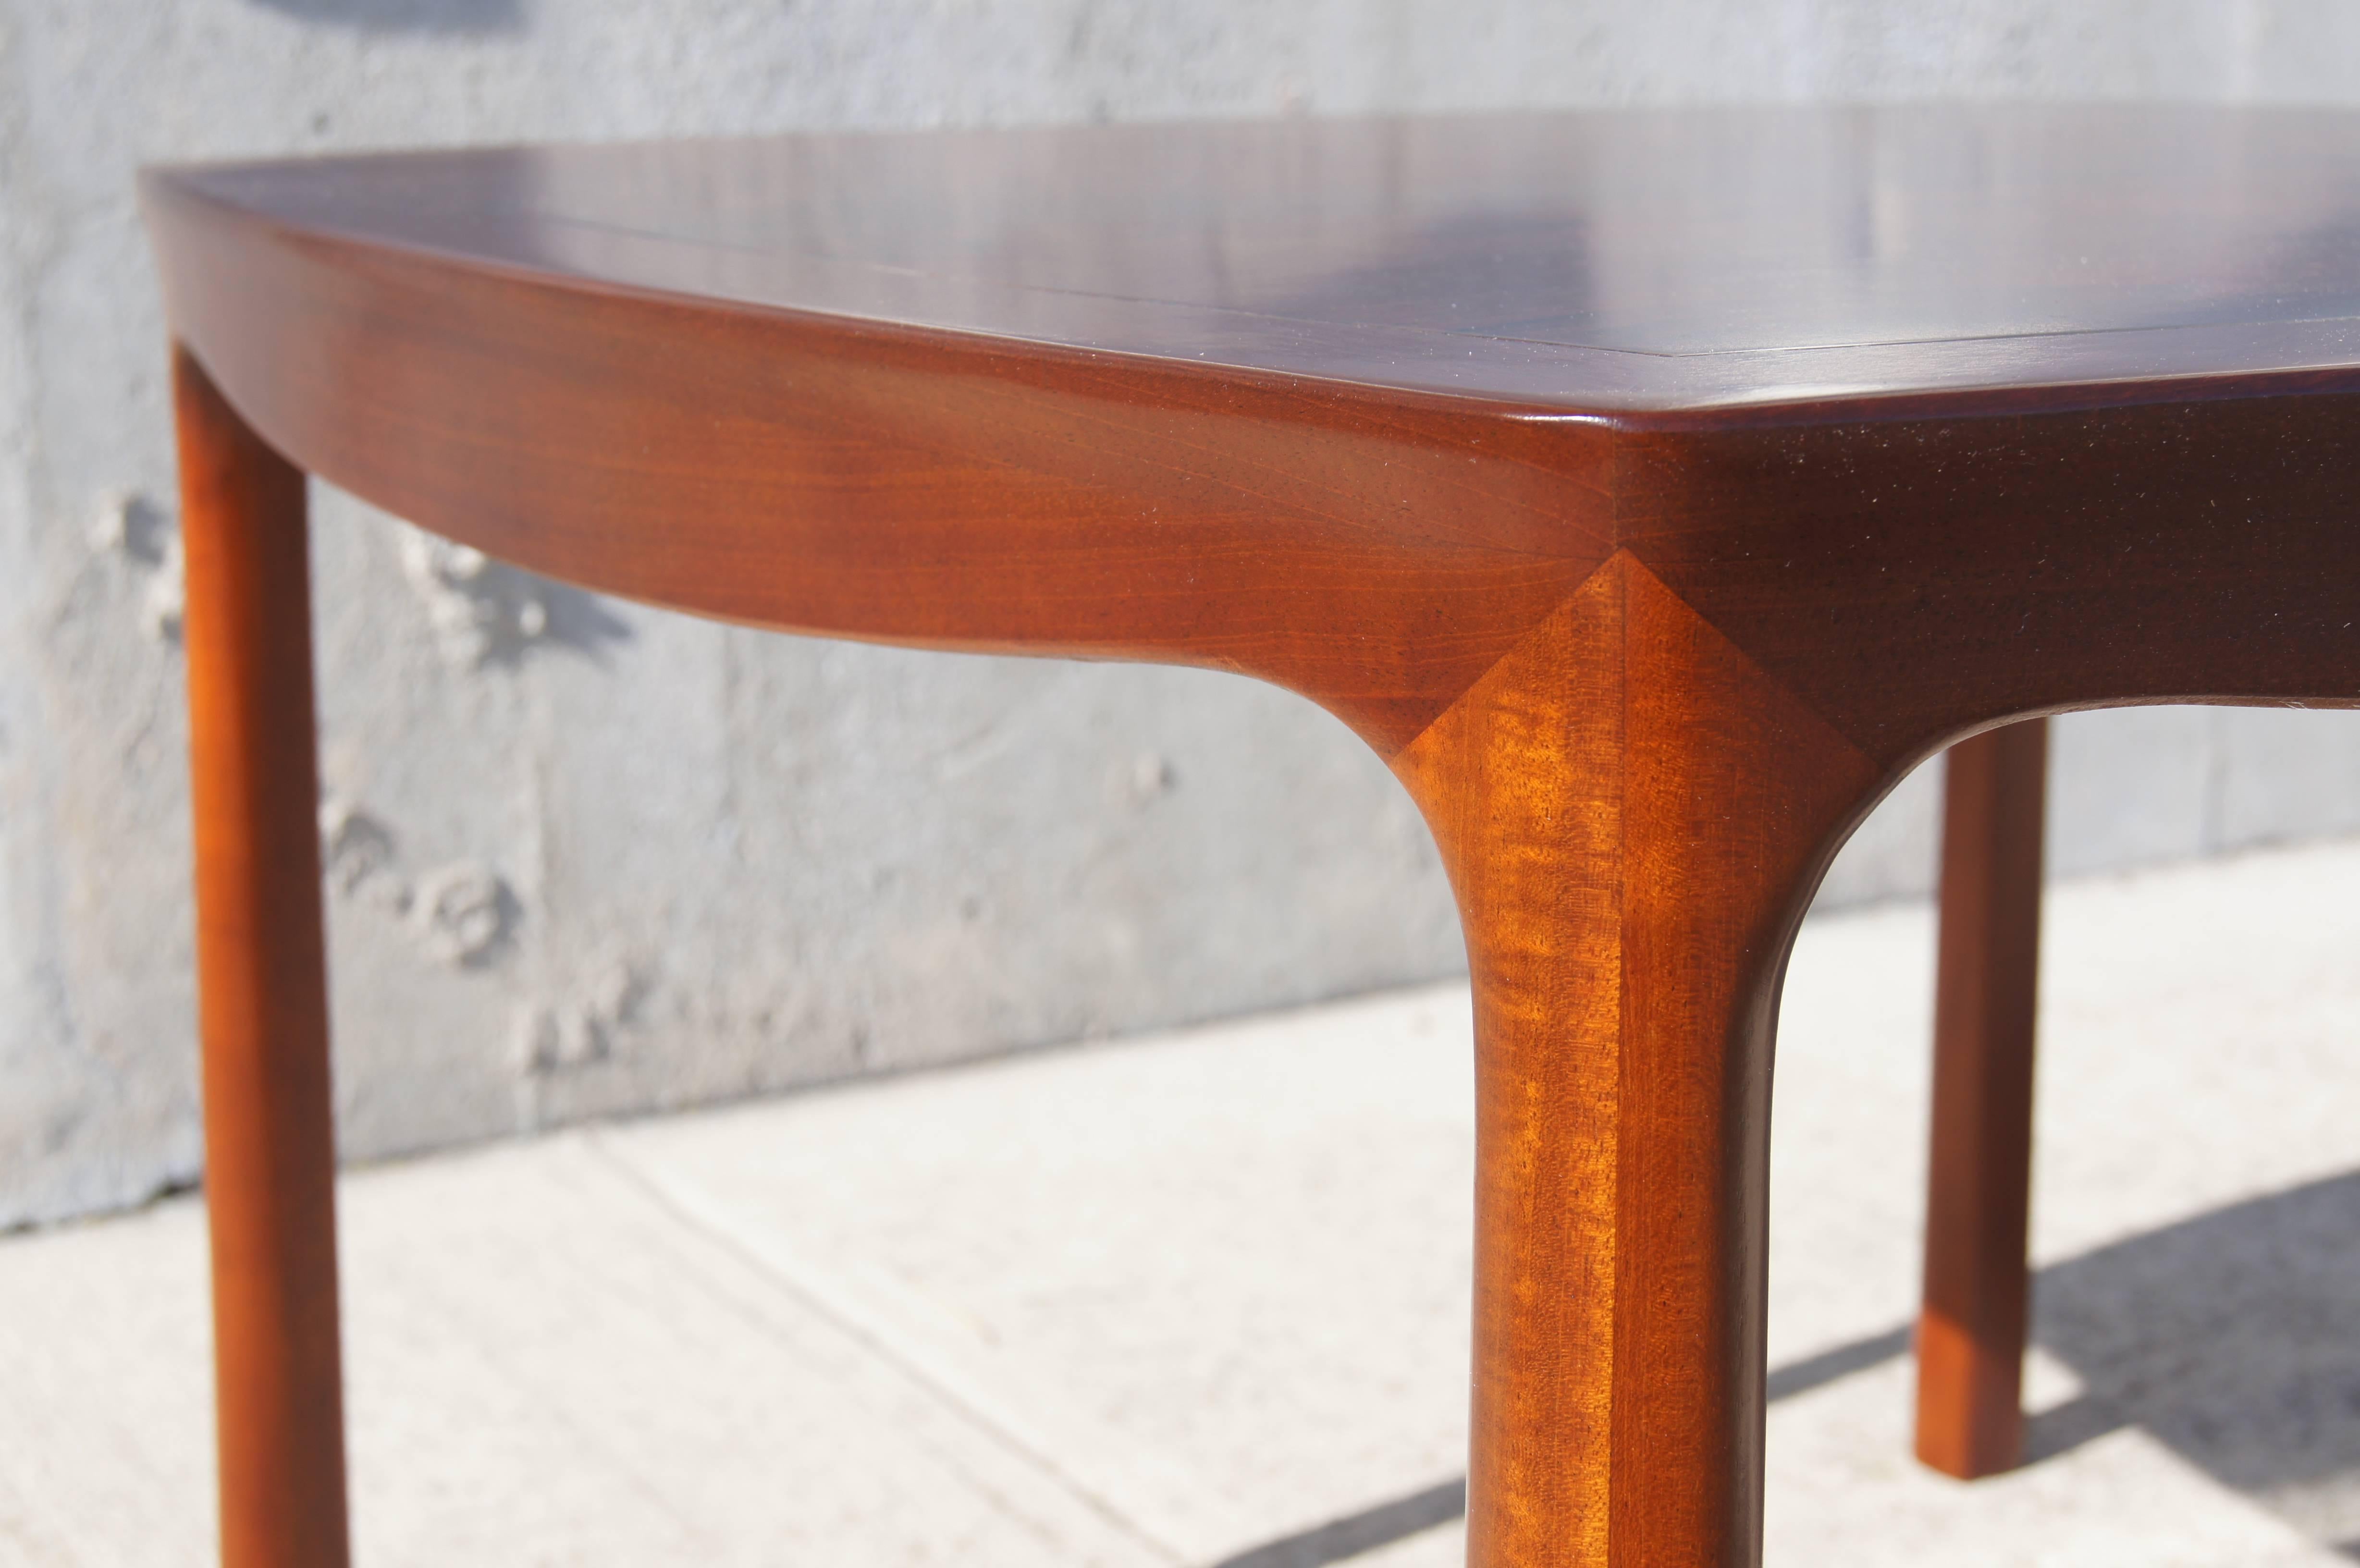 Rosewood and Mahogany Side Table by Edward Wormley for Dunbar In Good Condition For Sale In Dorchester, MA